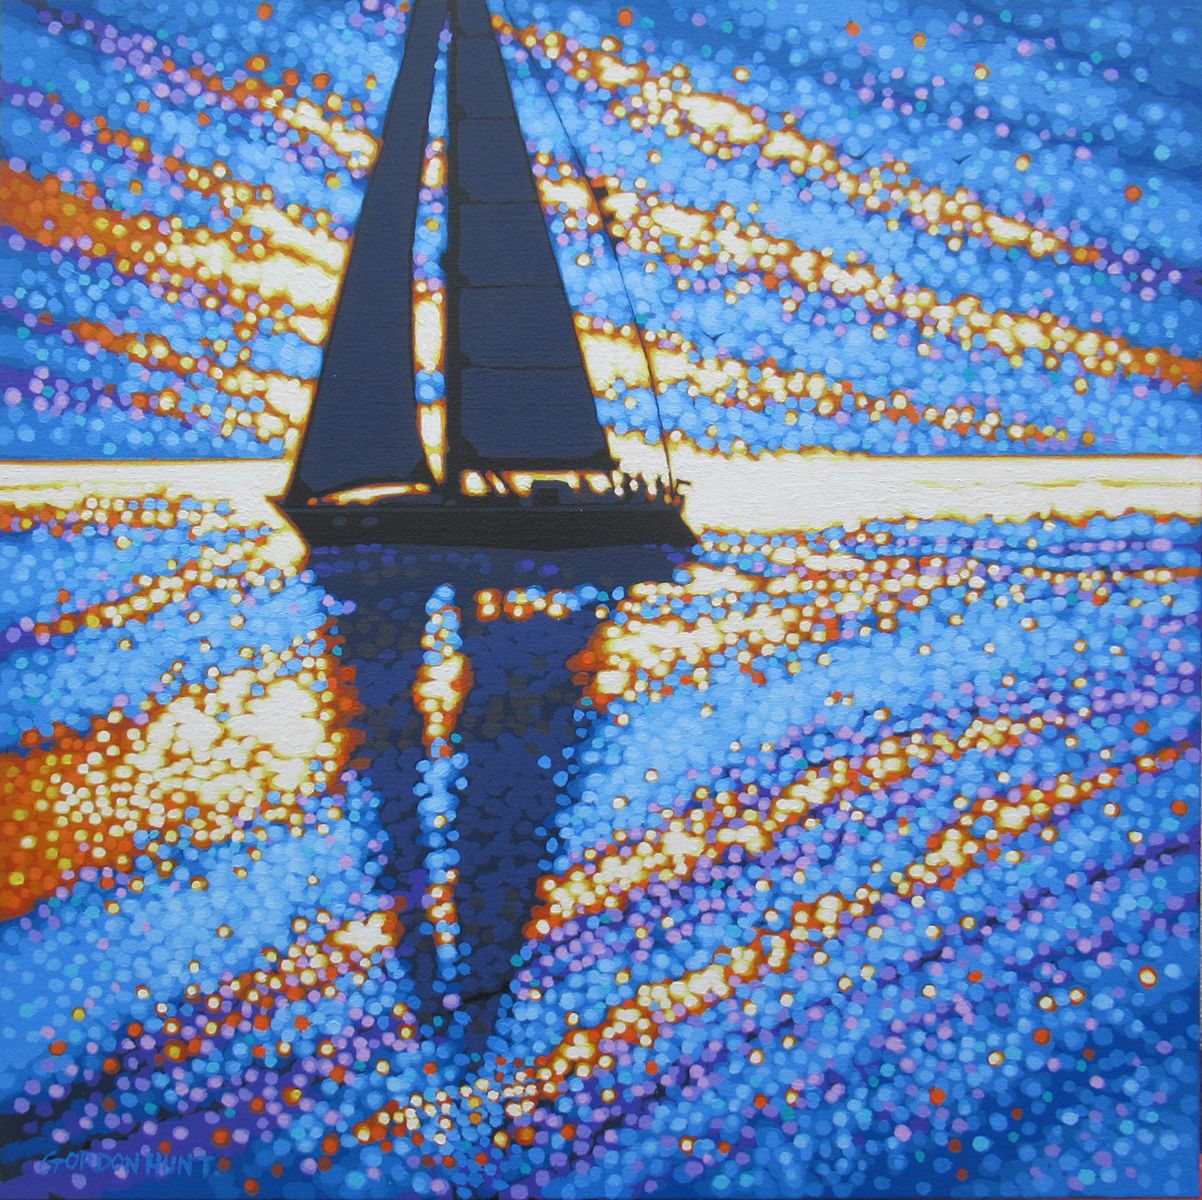 Sailing the Sparkling Sea by Gordon Hunt